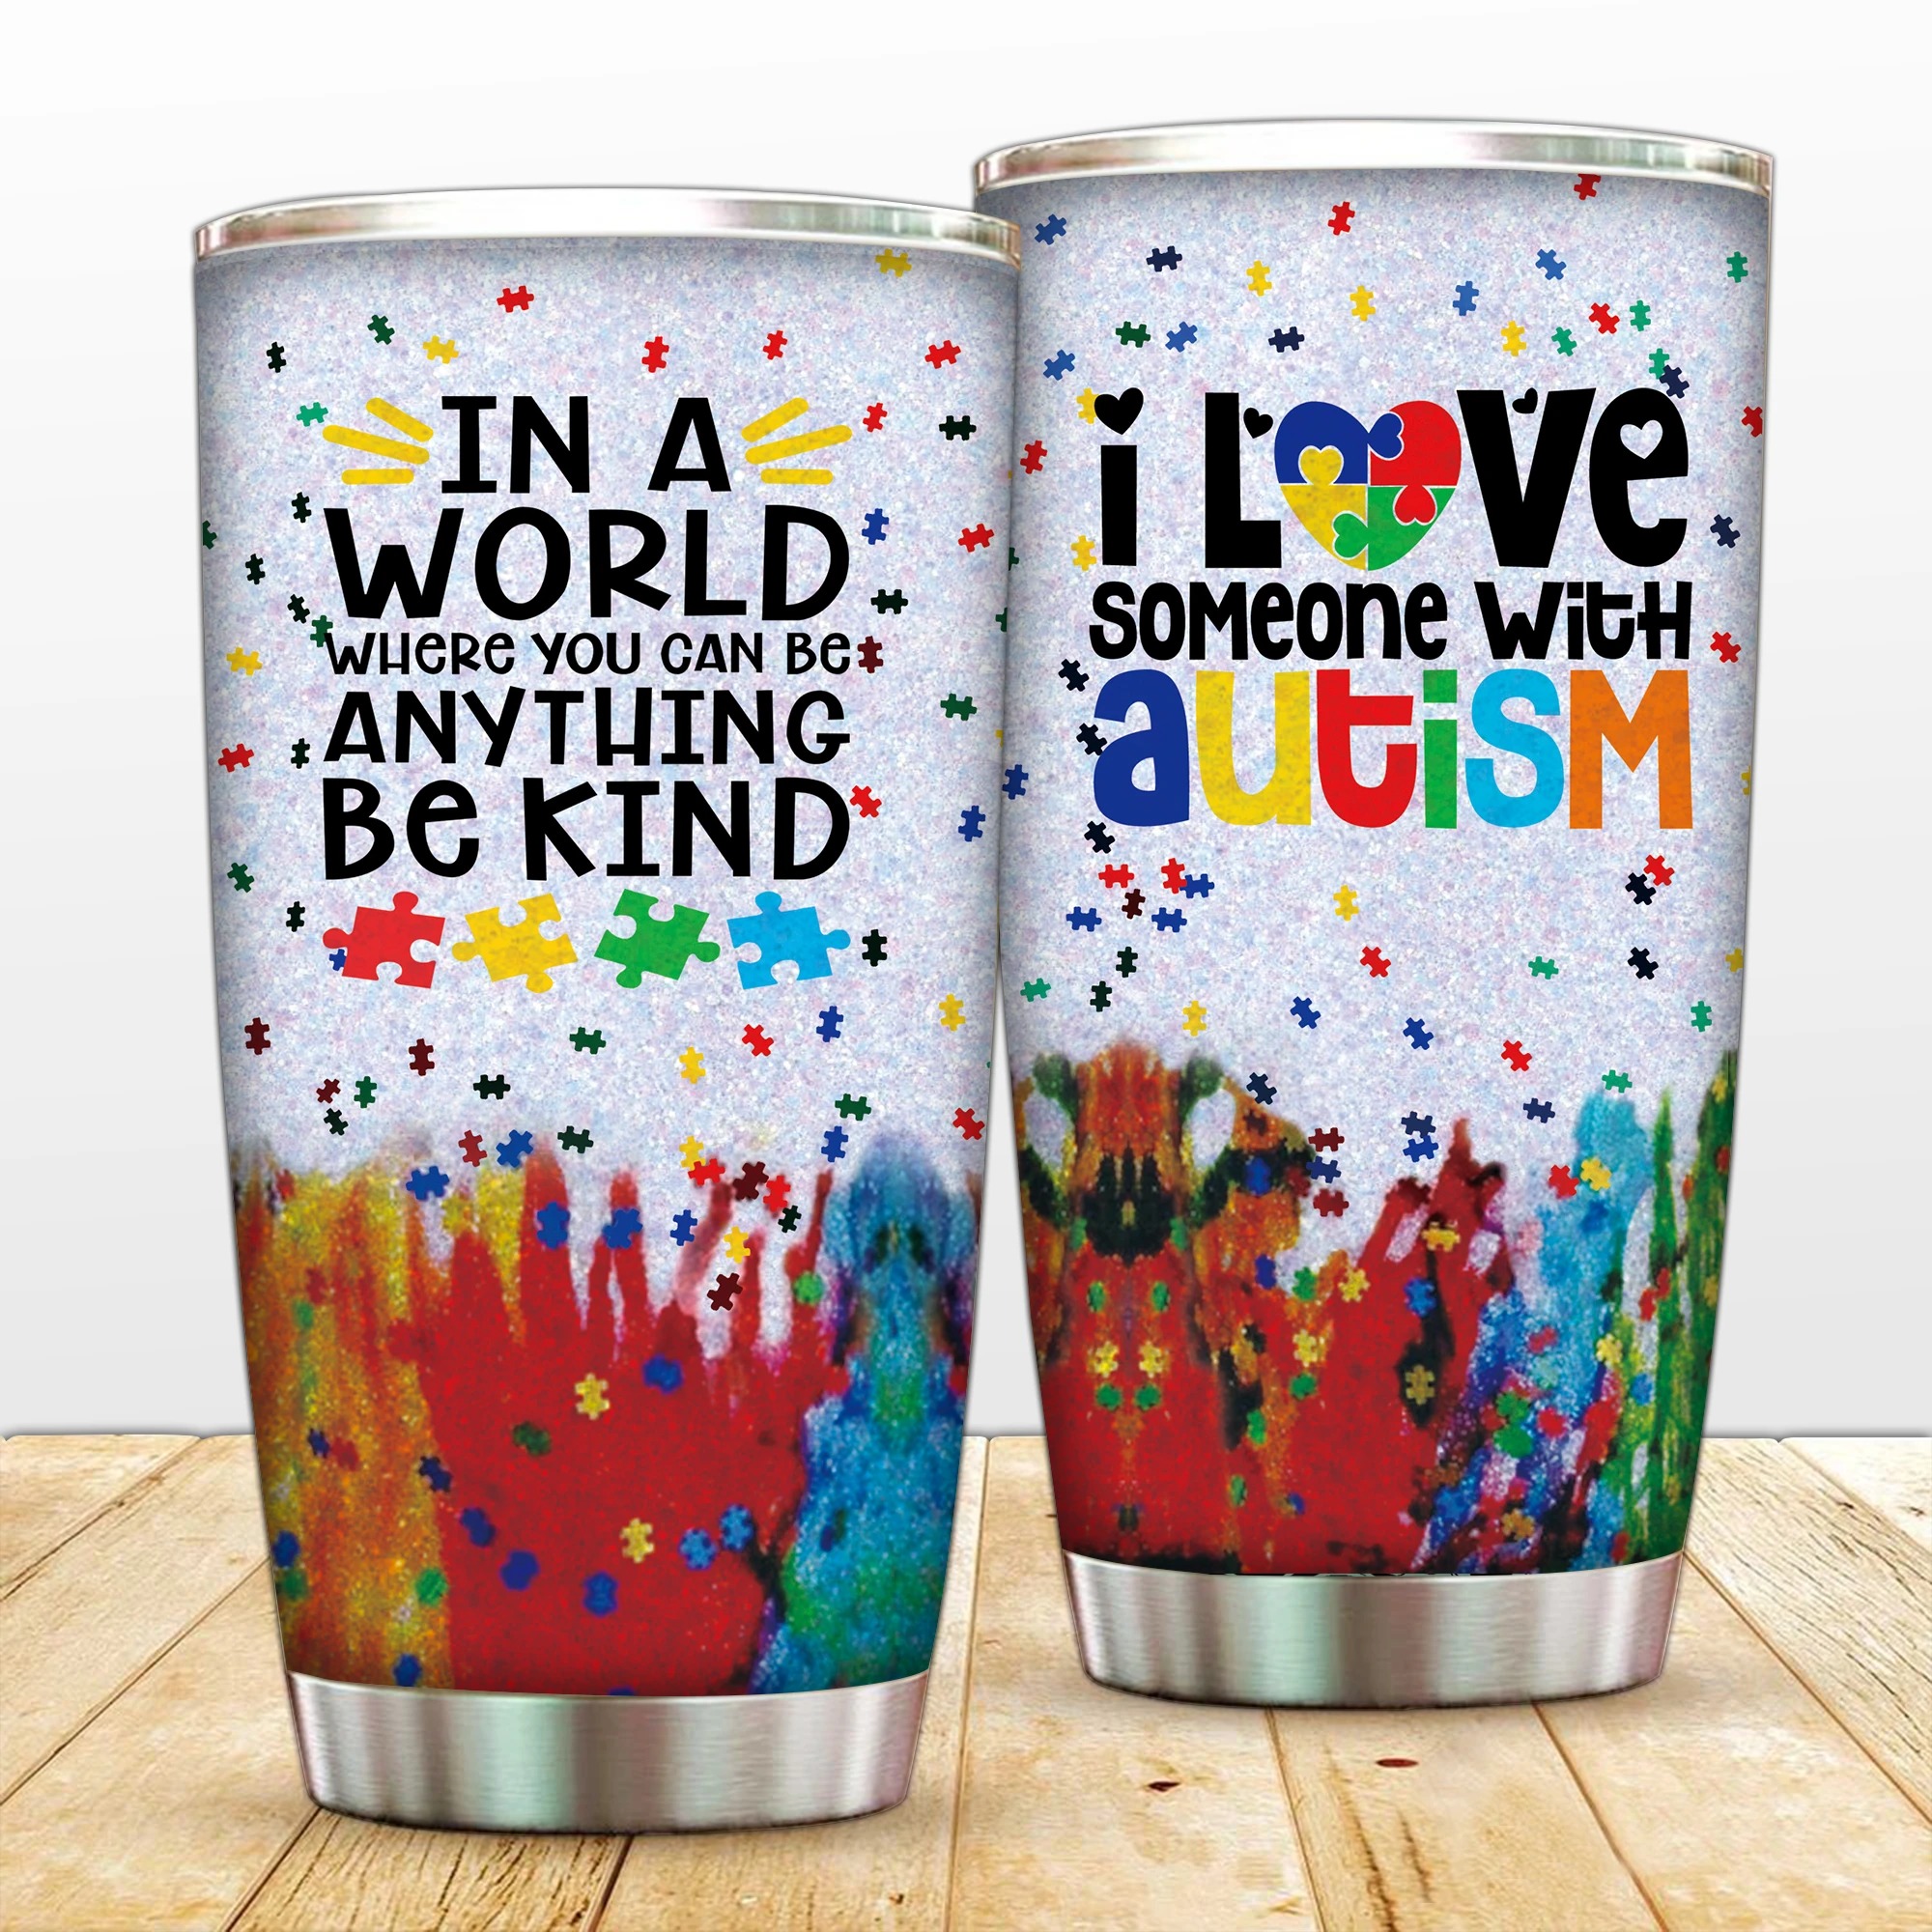 I love someone with autism tumbler – LIMITED EDITION